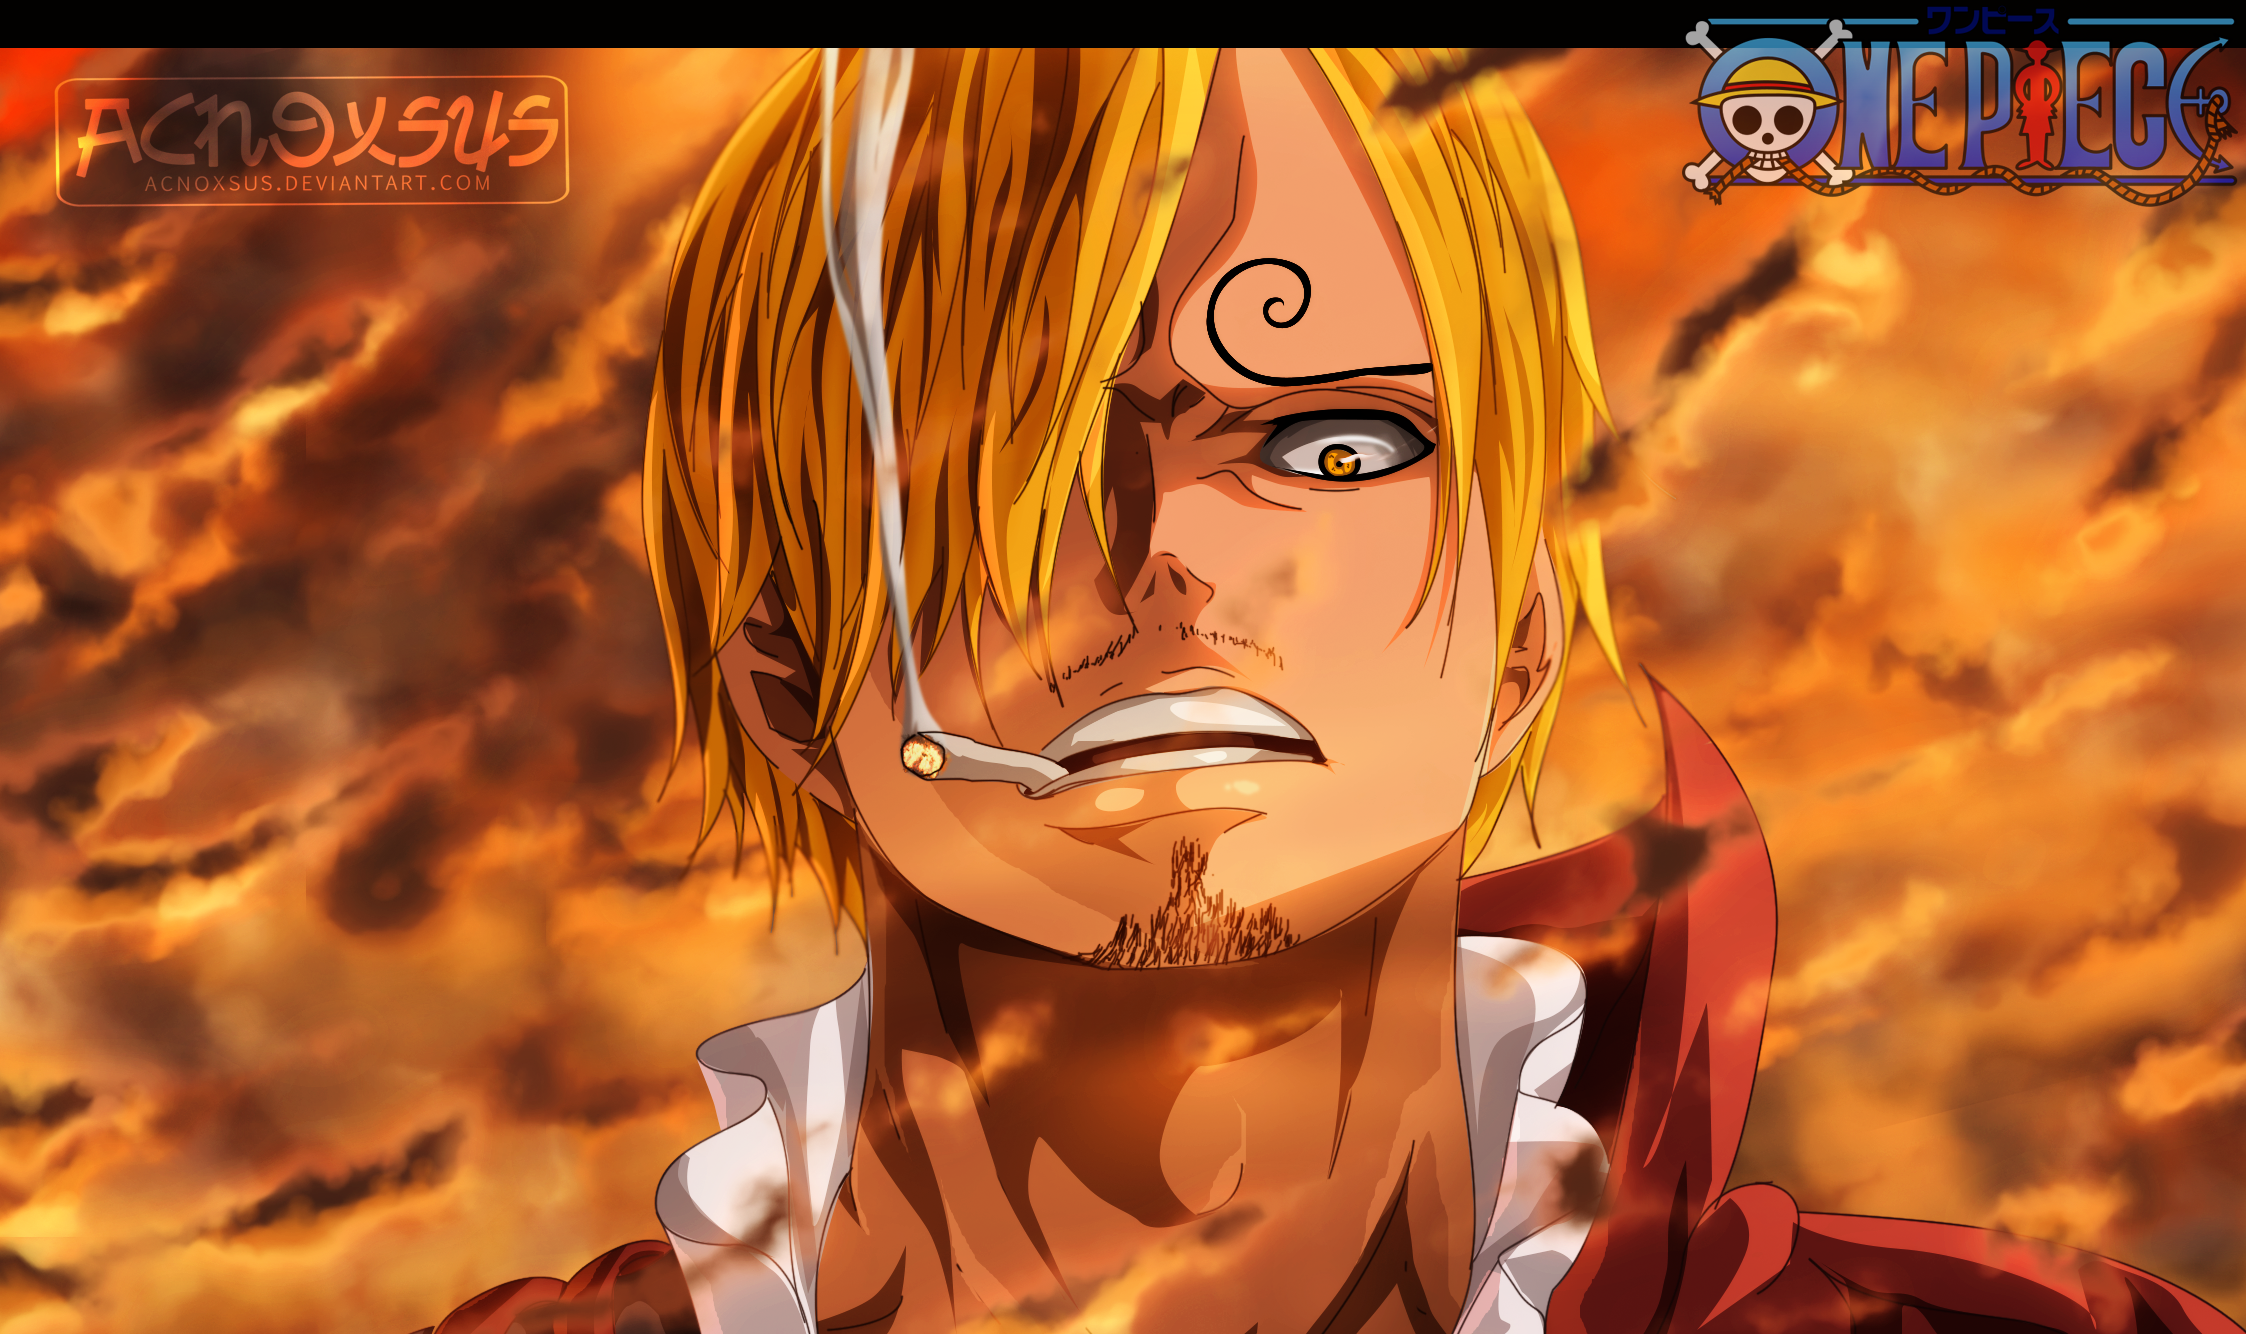 One Piece HD Wallpaper Background Image 2246x1334 ID944160 2246x1334